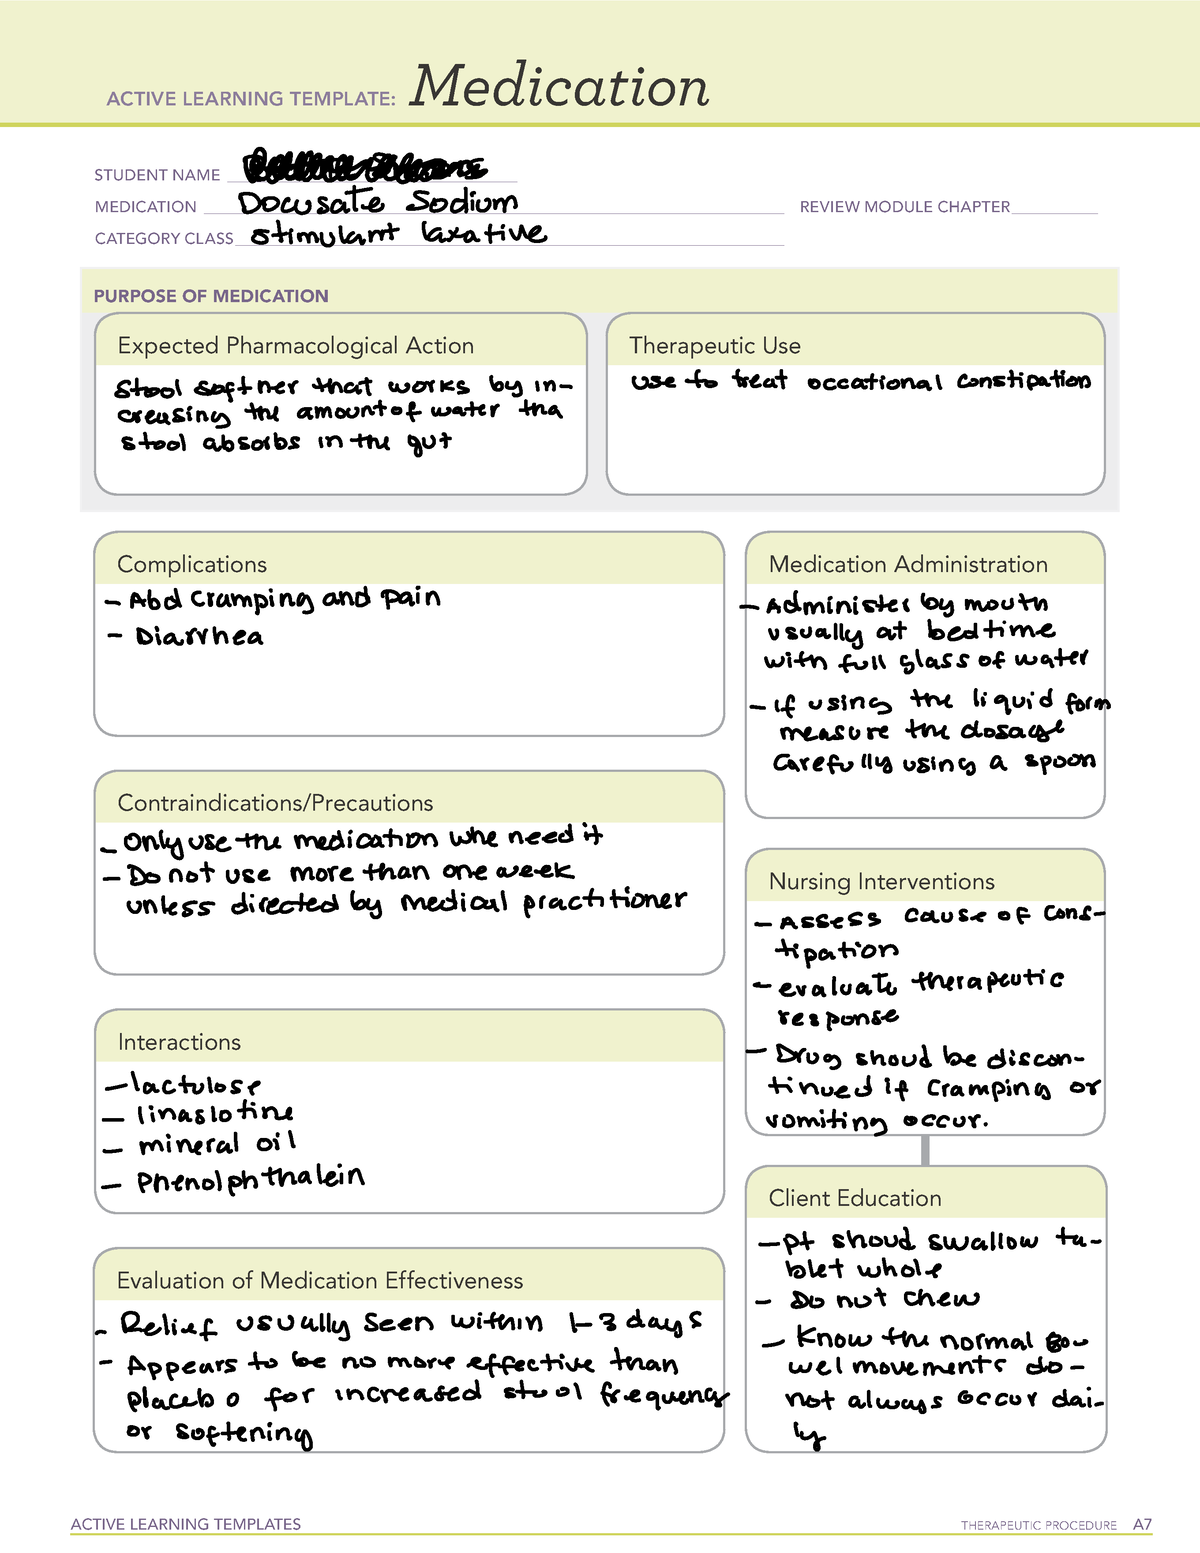 active-learning-template-medication-active-learning-templates-therapeutic-procedure-a